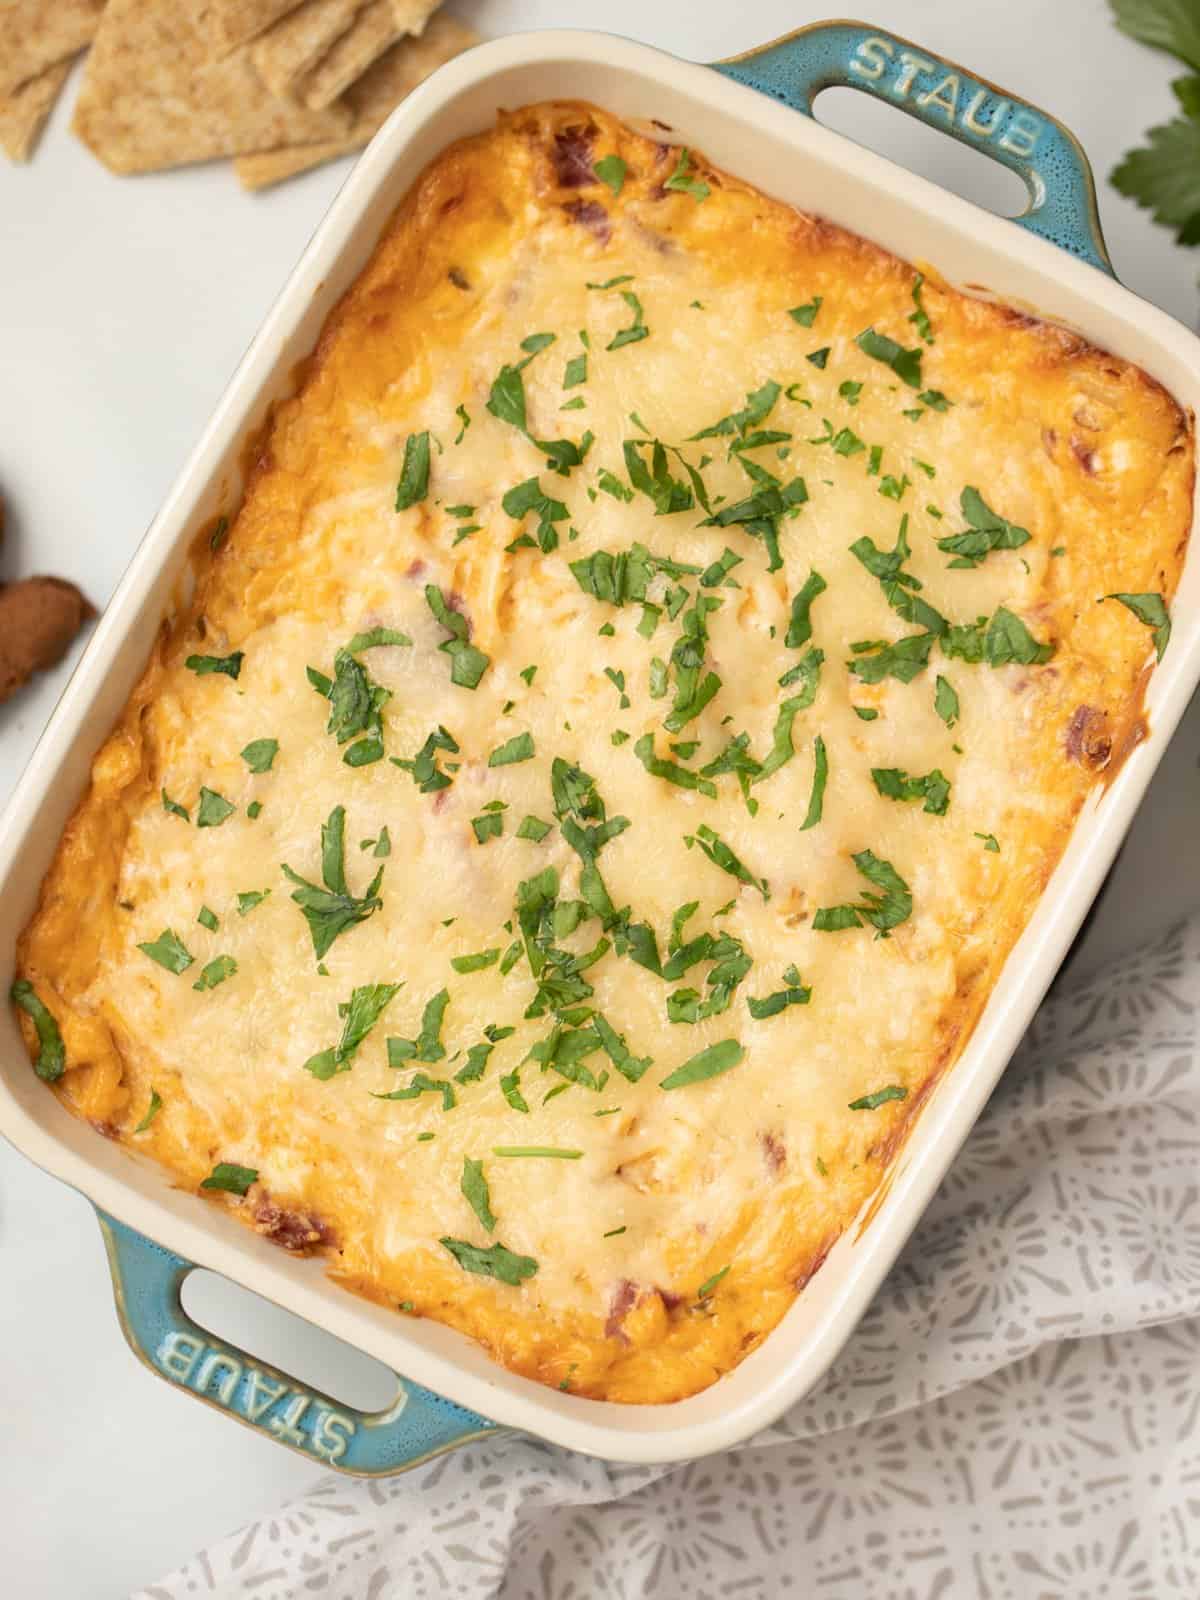 Hot Reuben dip in blue casserole dish topped with fresh parsley.